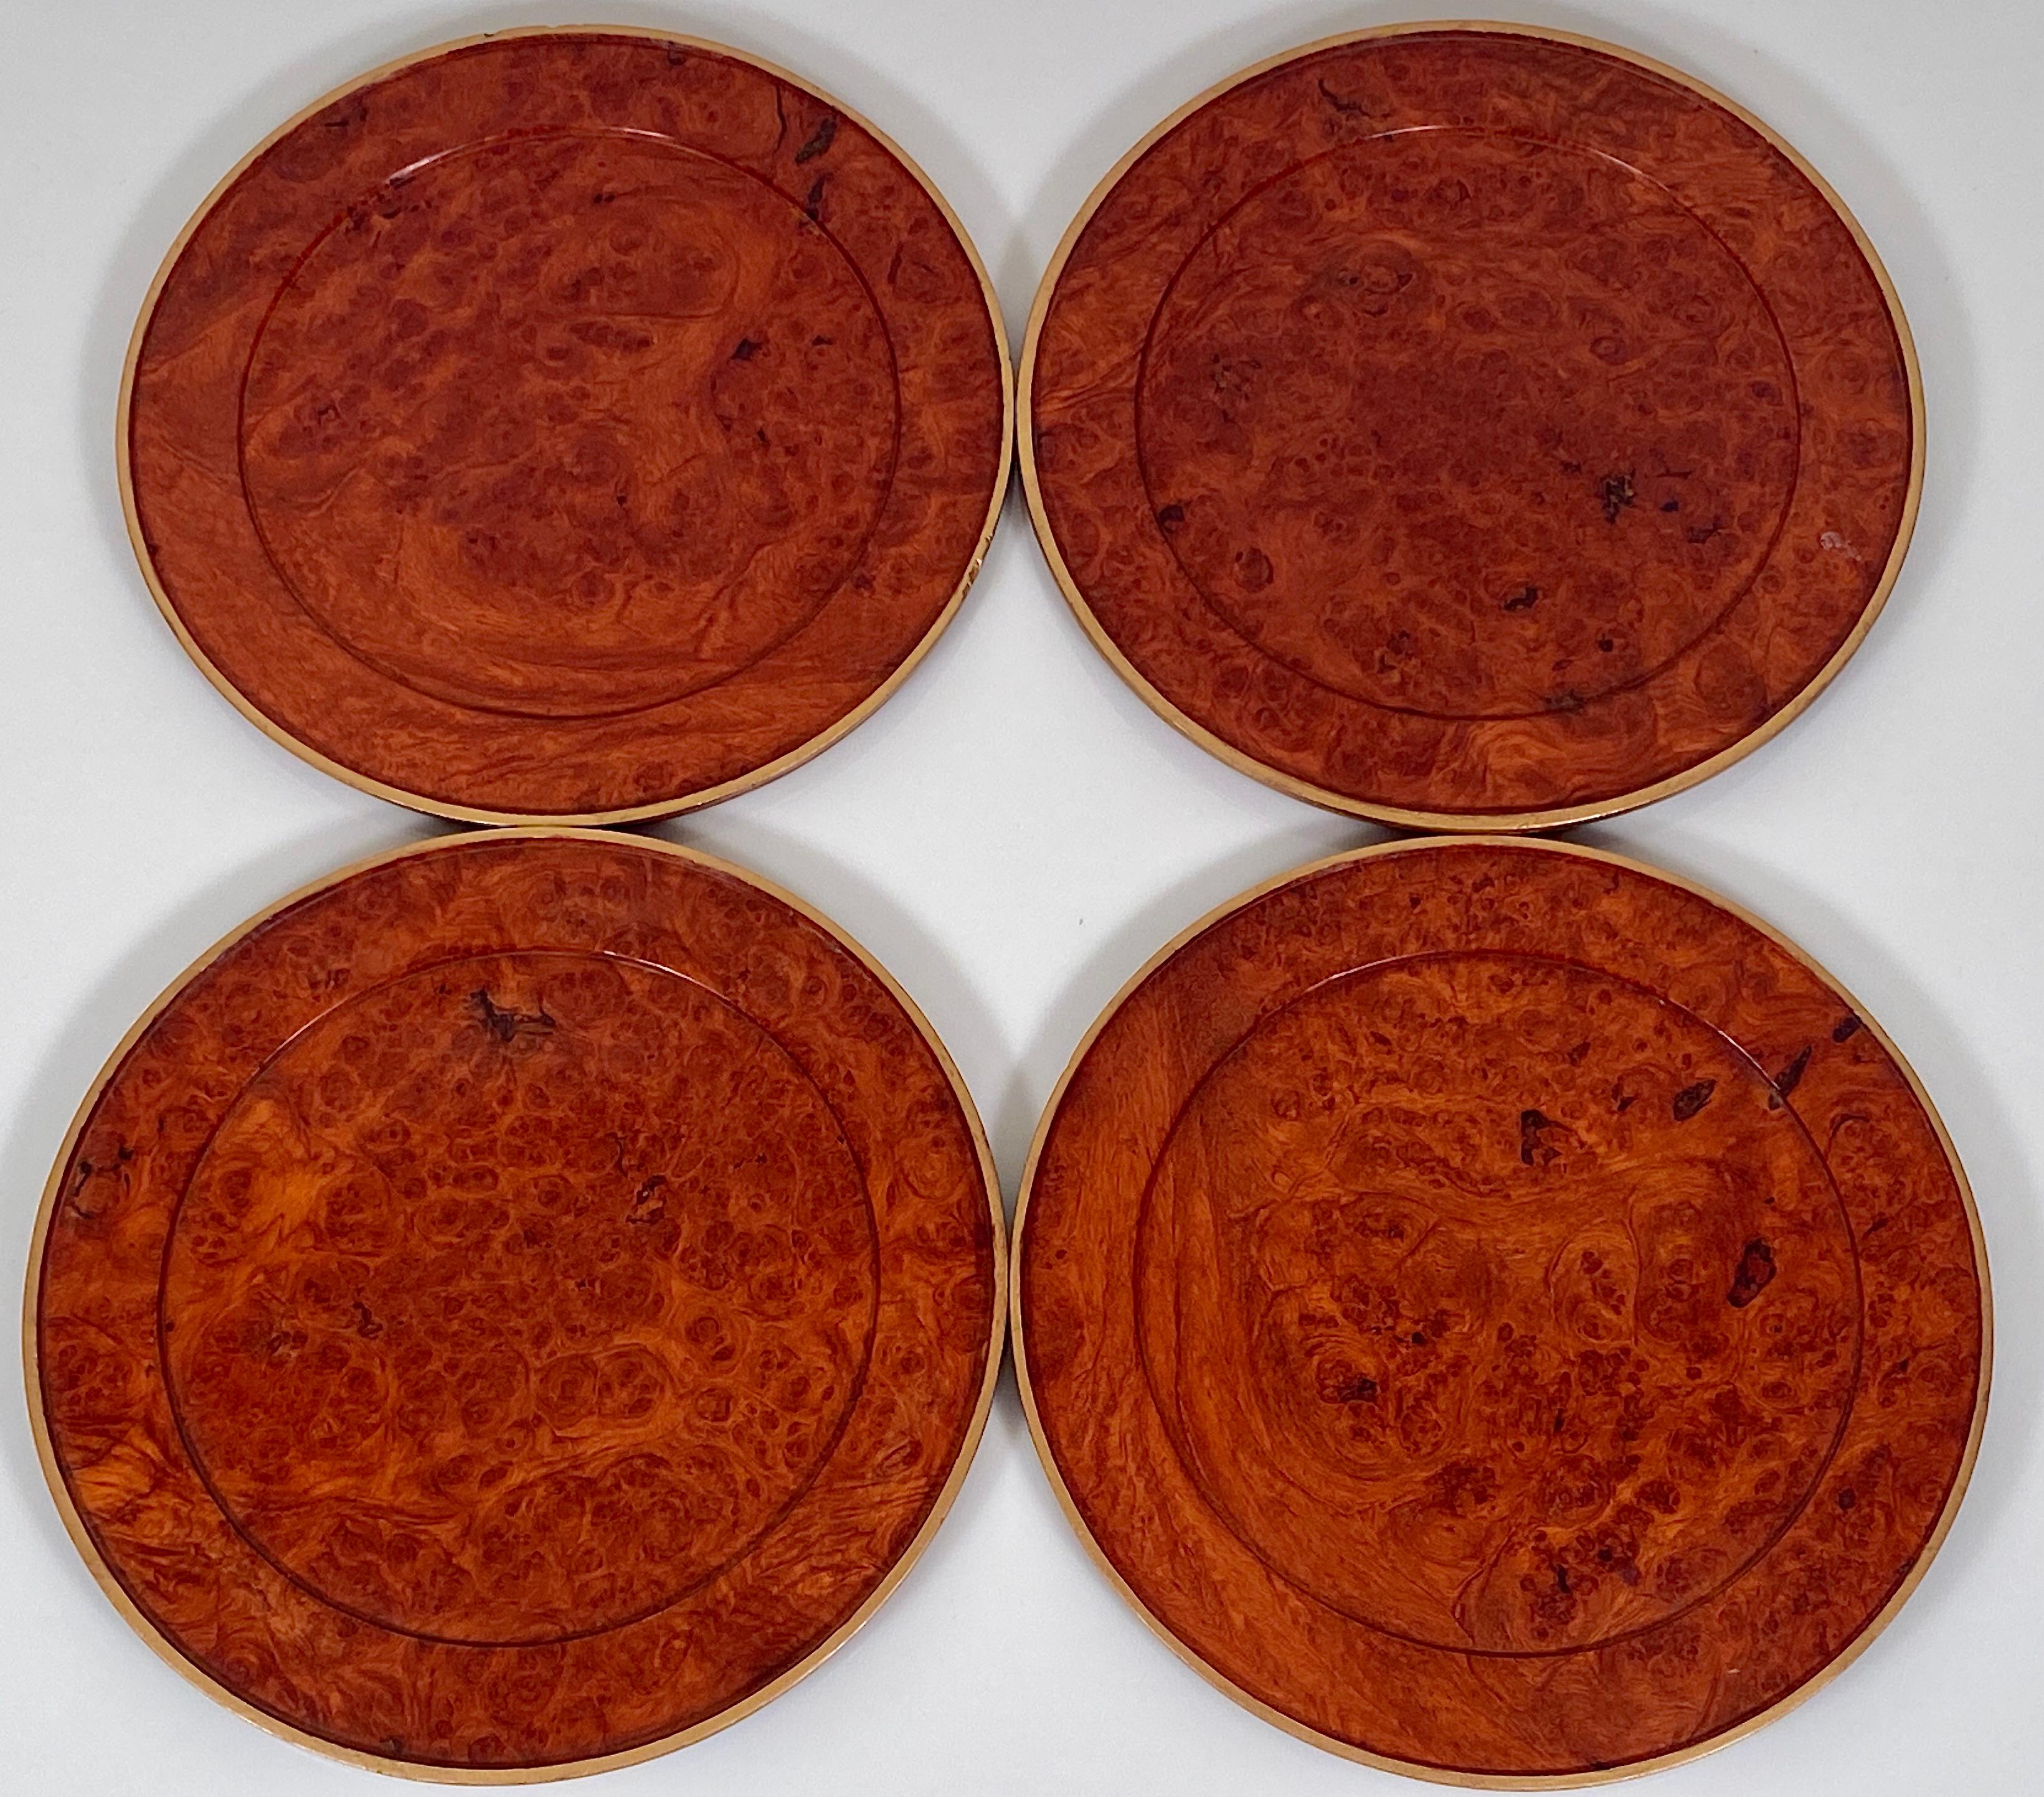 Modernist vintage set of eight wooden walnut burr plates, circa 1960
Minimal in shape, each plate is turned carved out of walnut burr with a shallow lip and a circular cavity on the inside with faded gilt gold on outside edge. 
Two of eight plates